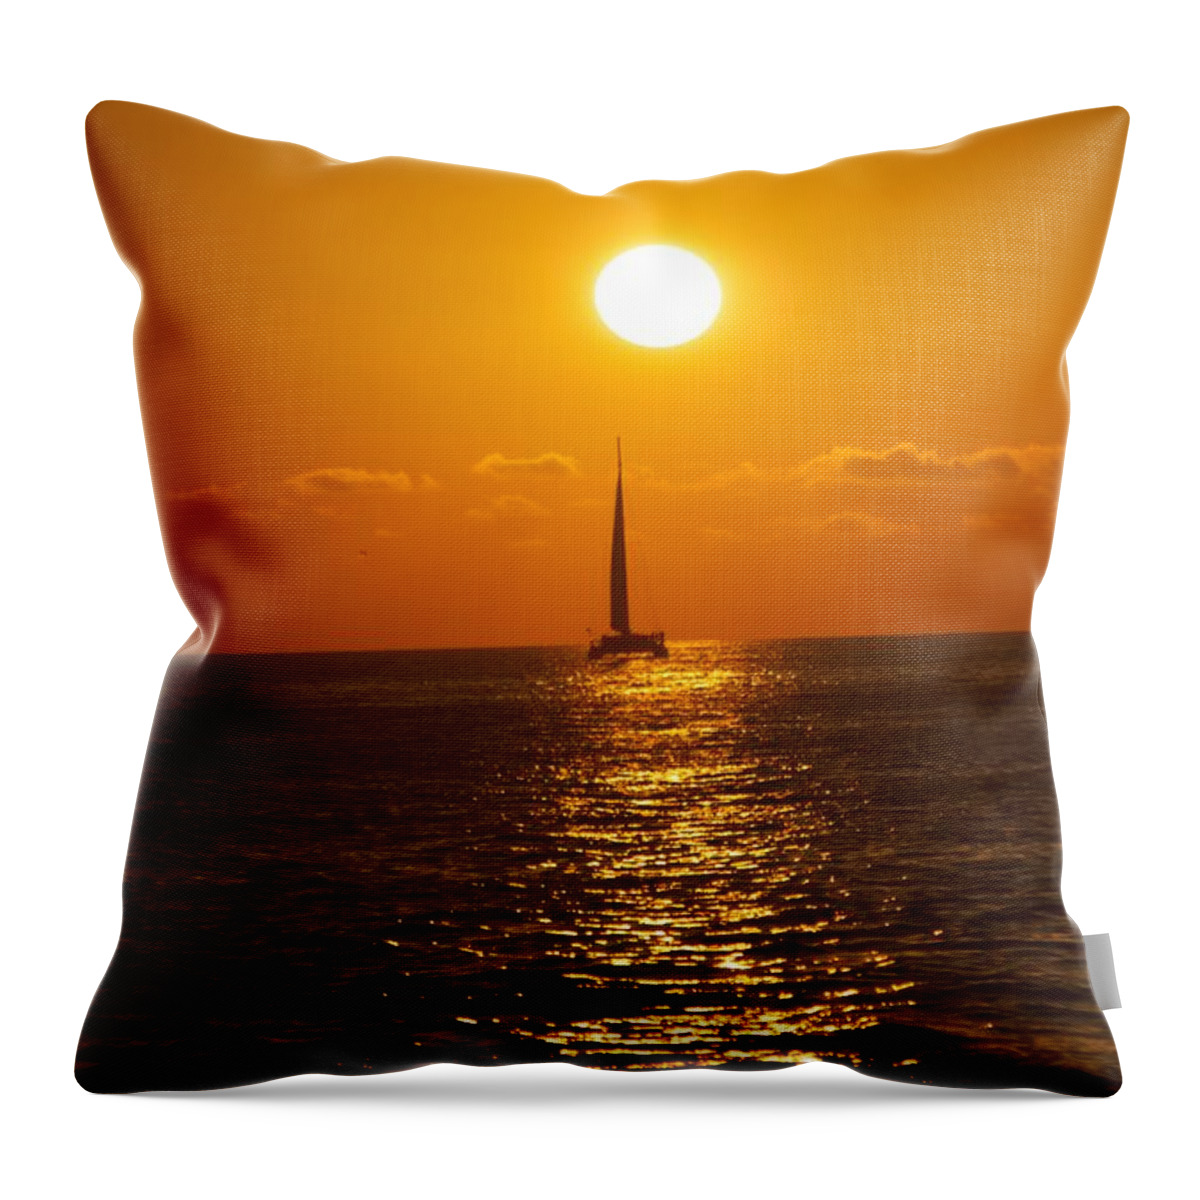 Key West Throw Pillow featuring the photograph Sailing at Sunset by Allan Morrison